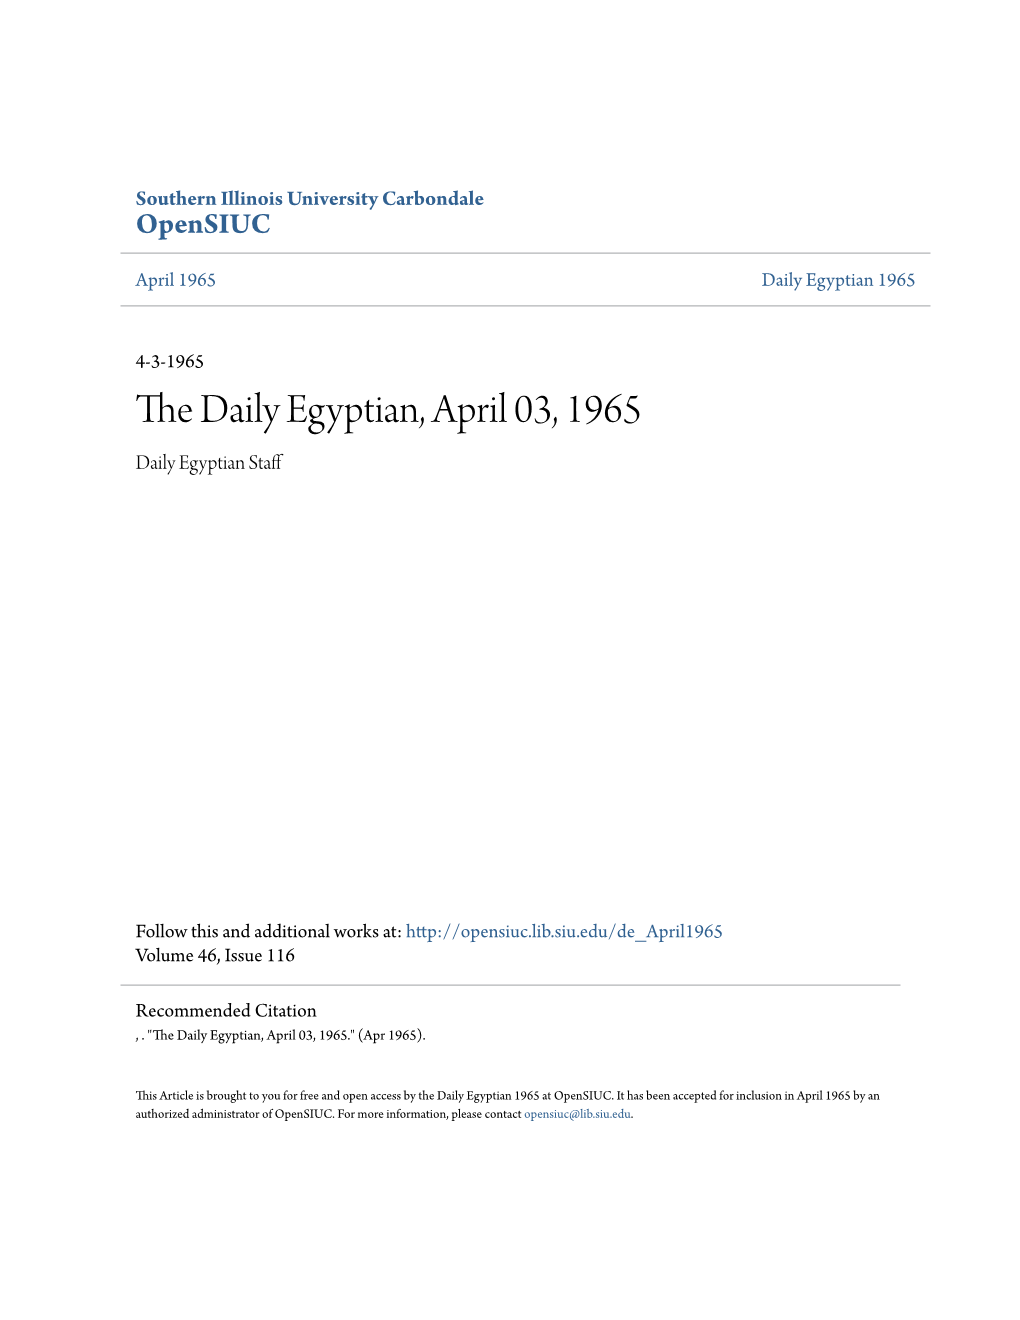 The Daily Egyptian, April 03, 1965